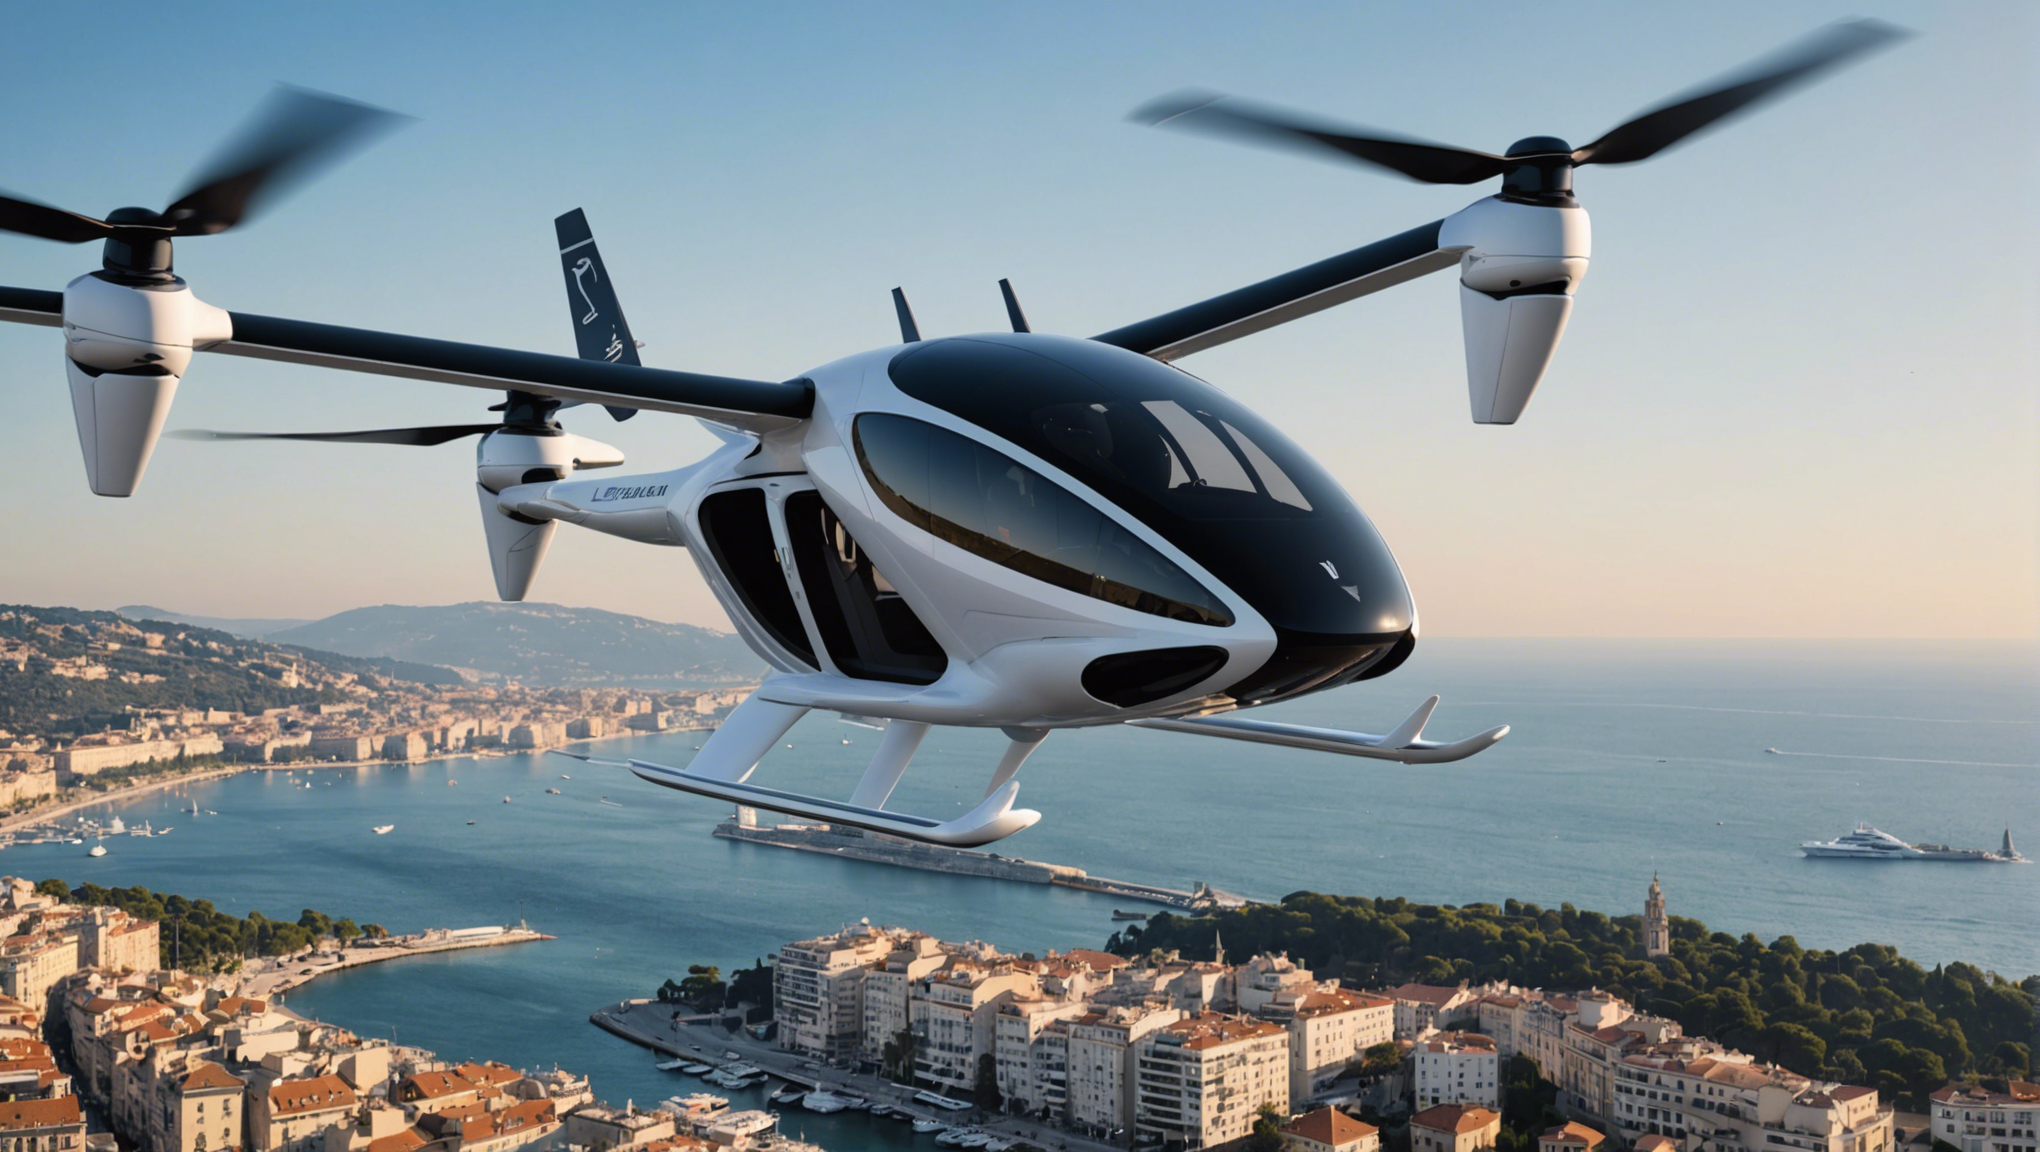 discover the lilium jet evtol, the new electric vertical take-off aircraft that will soon be in service on the prestigious côte d'azur from 2026. an electrifying aerial future awaits you!